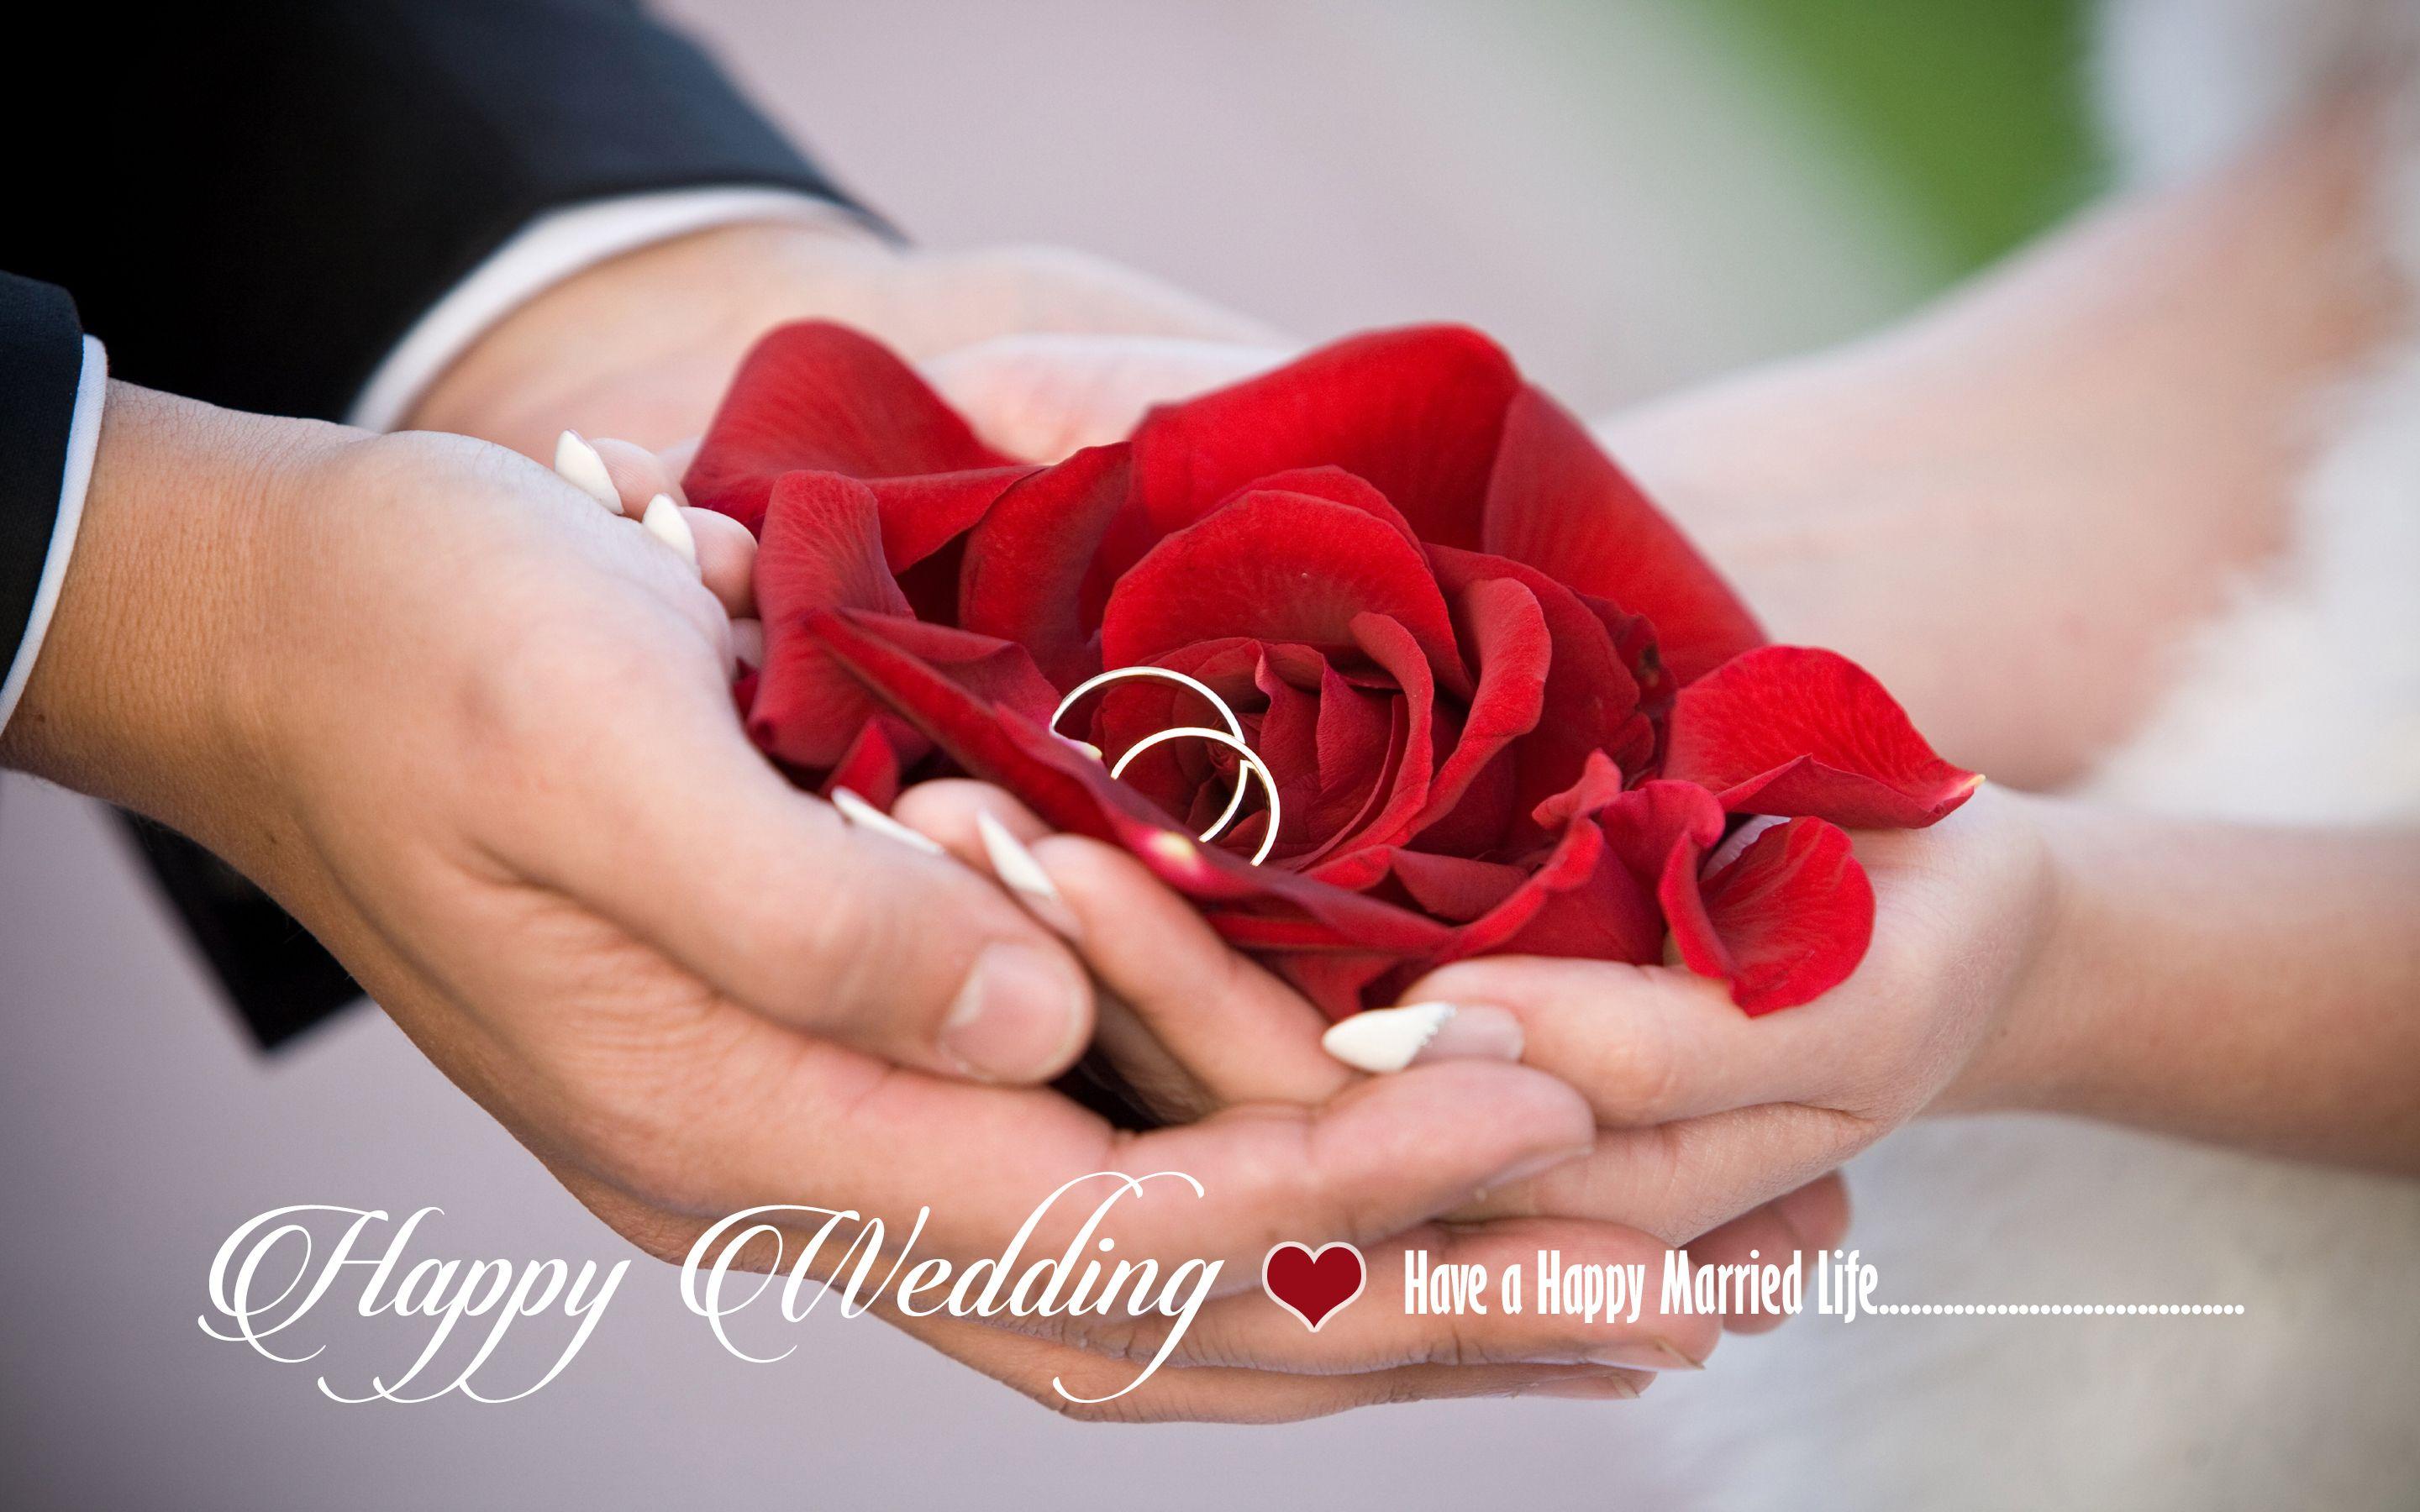 Happy Wedding Wishes HD Wallpaper Wallpaper. Happy wedding wishes, Happy promise day, Wedding wishes quotes